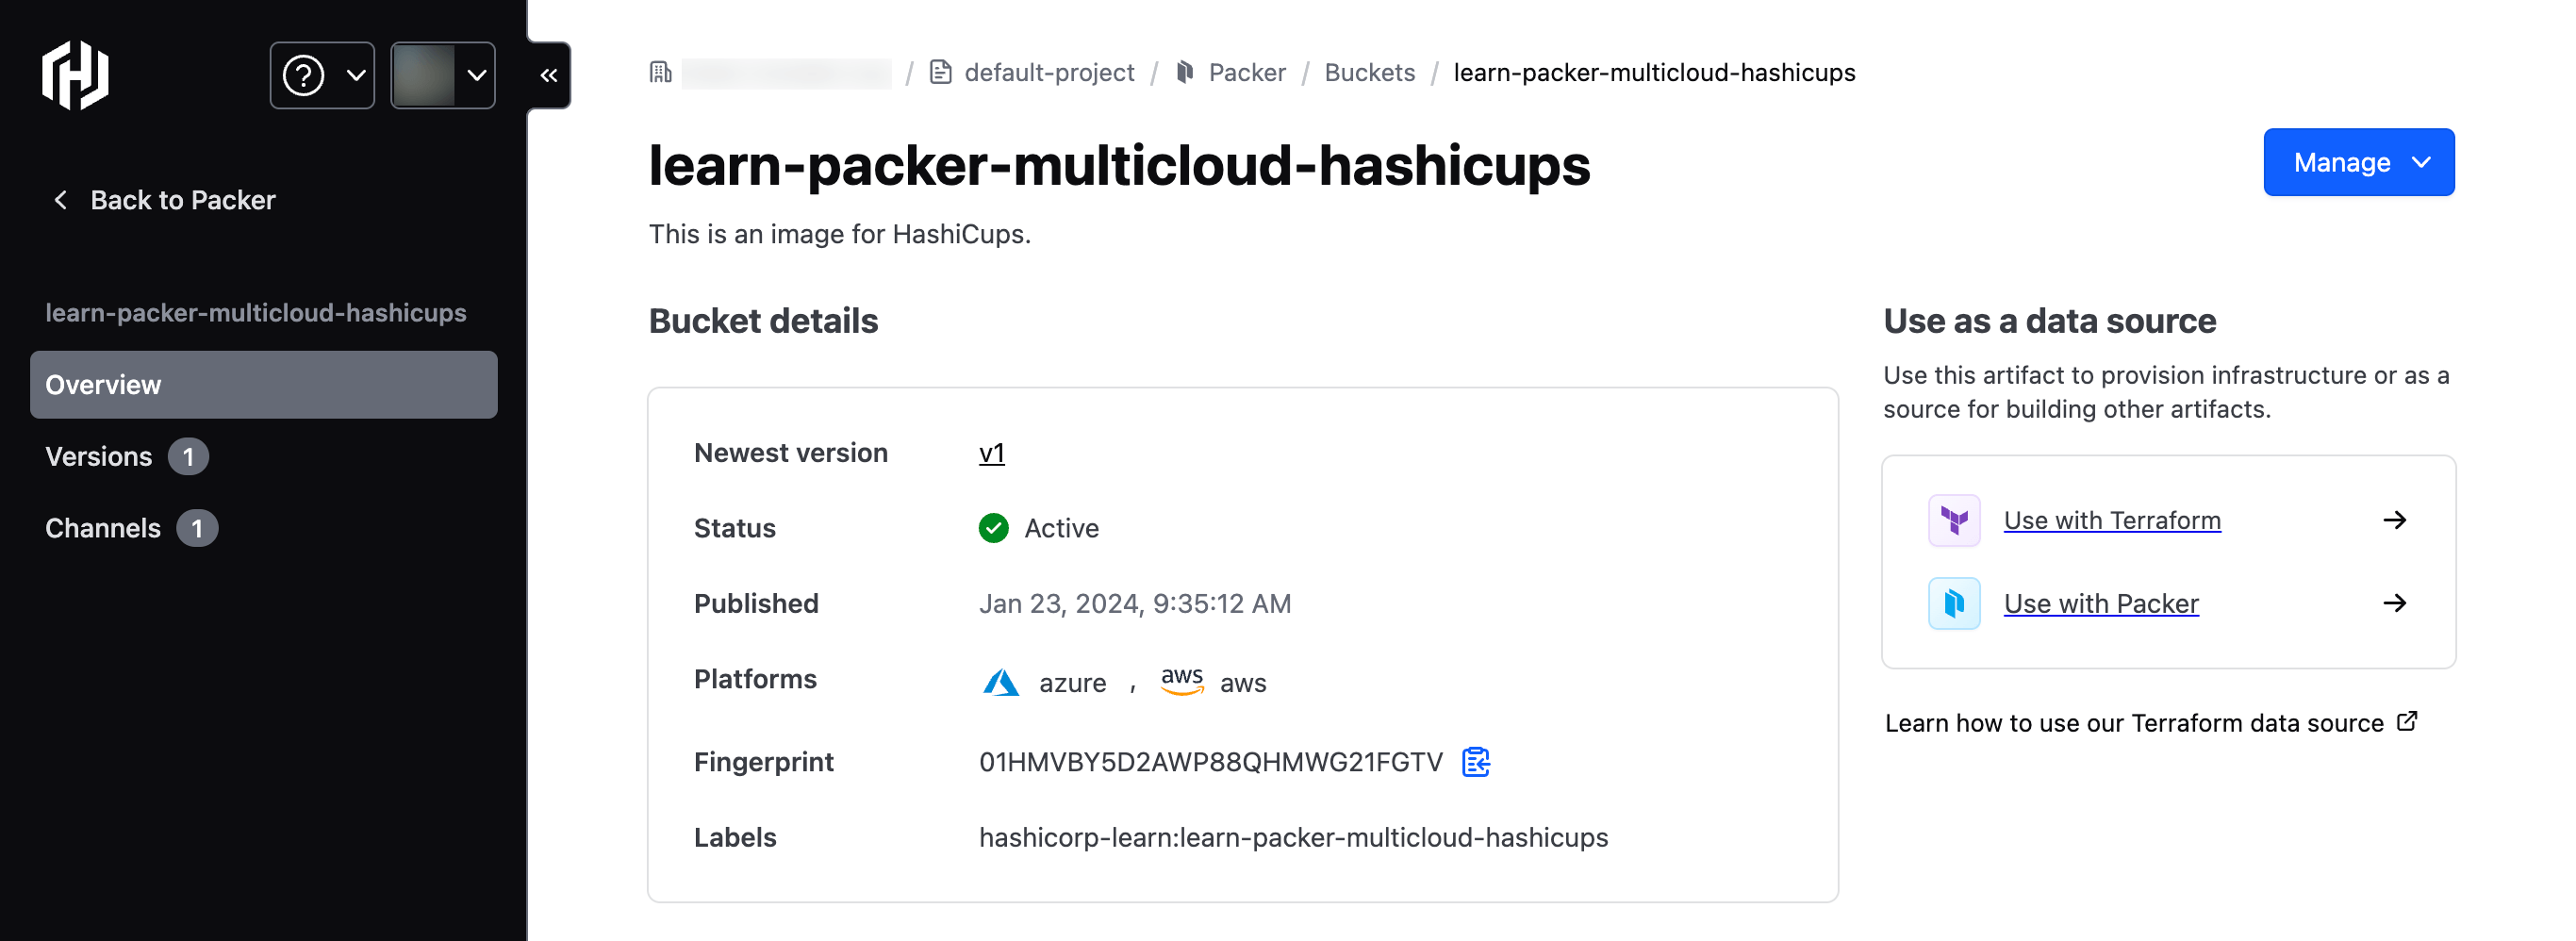 The `learn-packer-multicloud-hashicups` bucket in HCP Packer